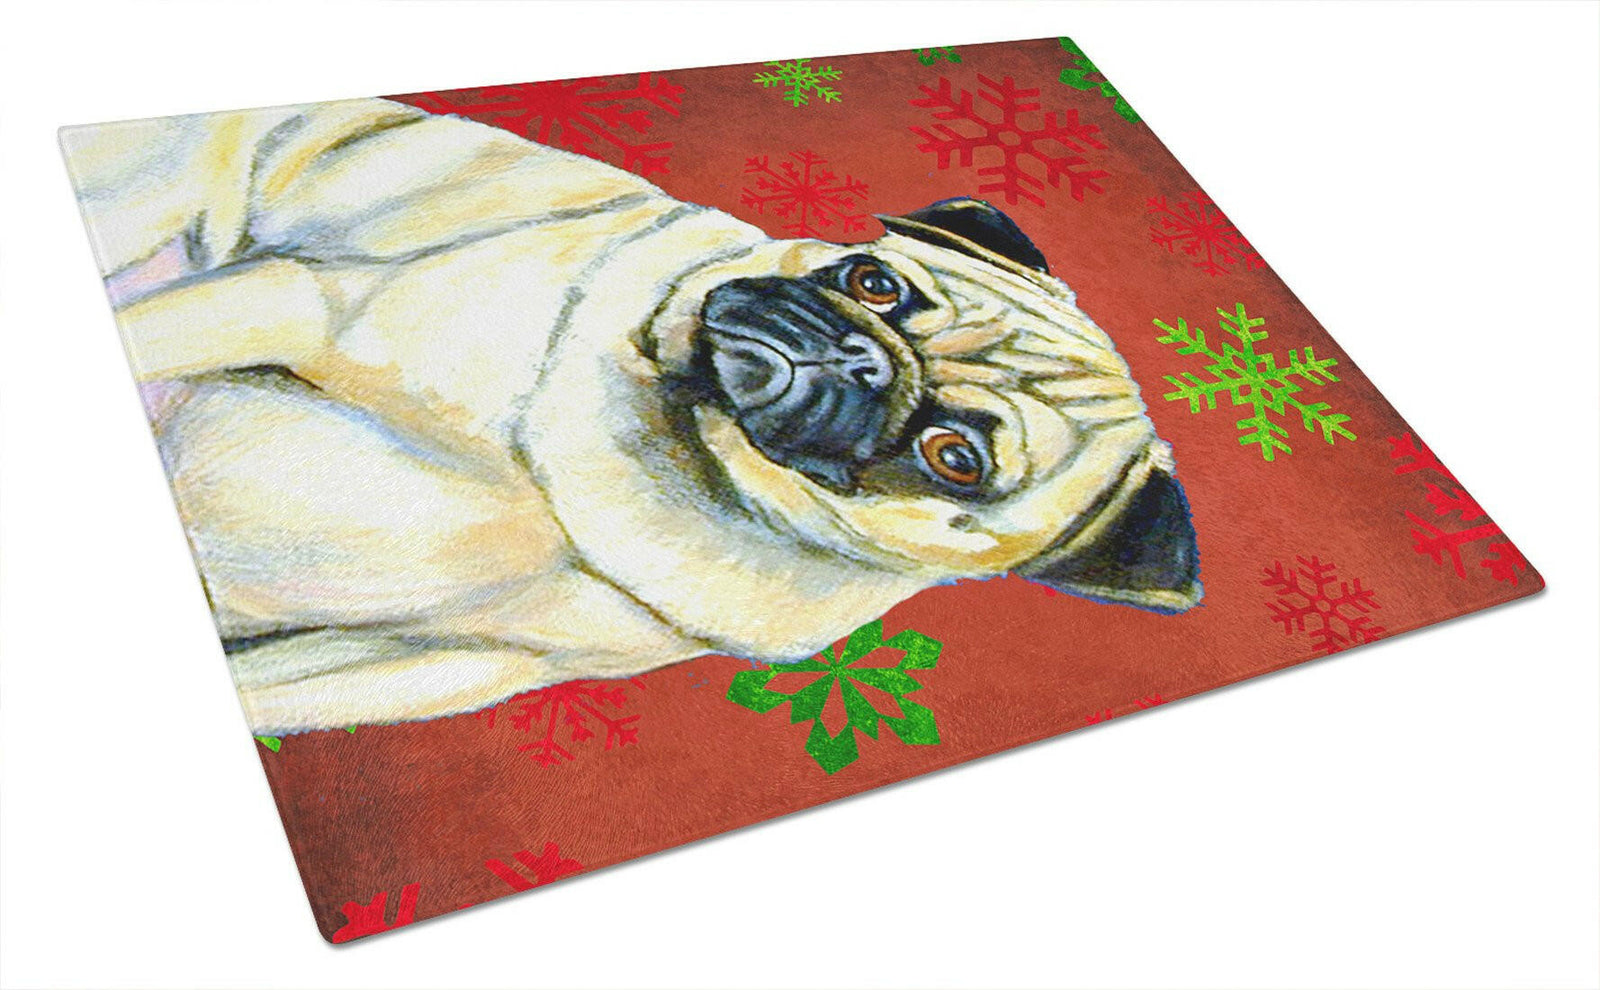 Pug Red and Green Snowflakes Holiday Christmas Glass Cutting Board Large by Caroline's Treasures